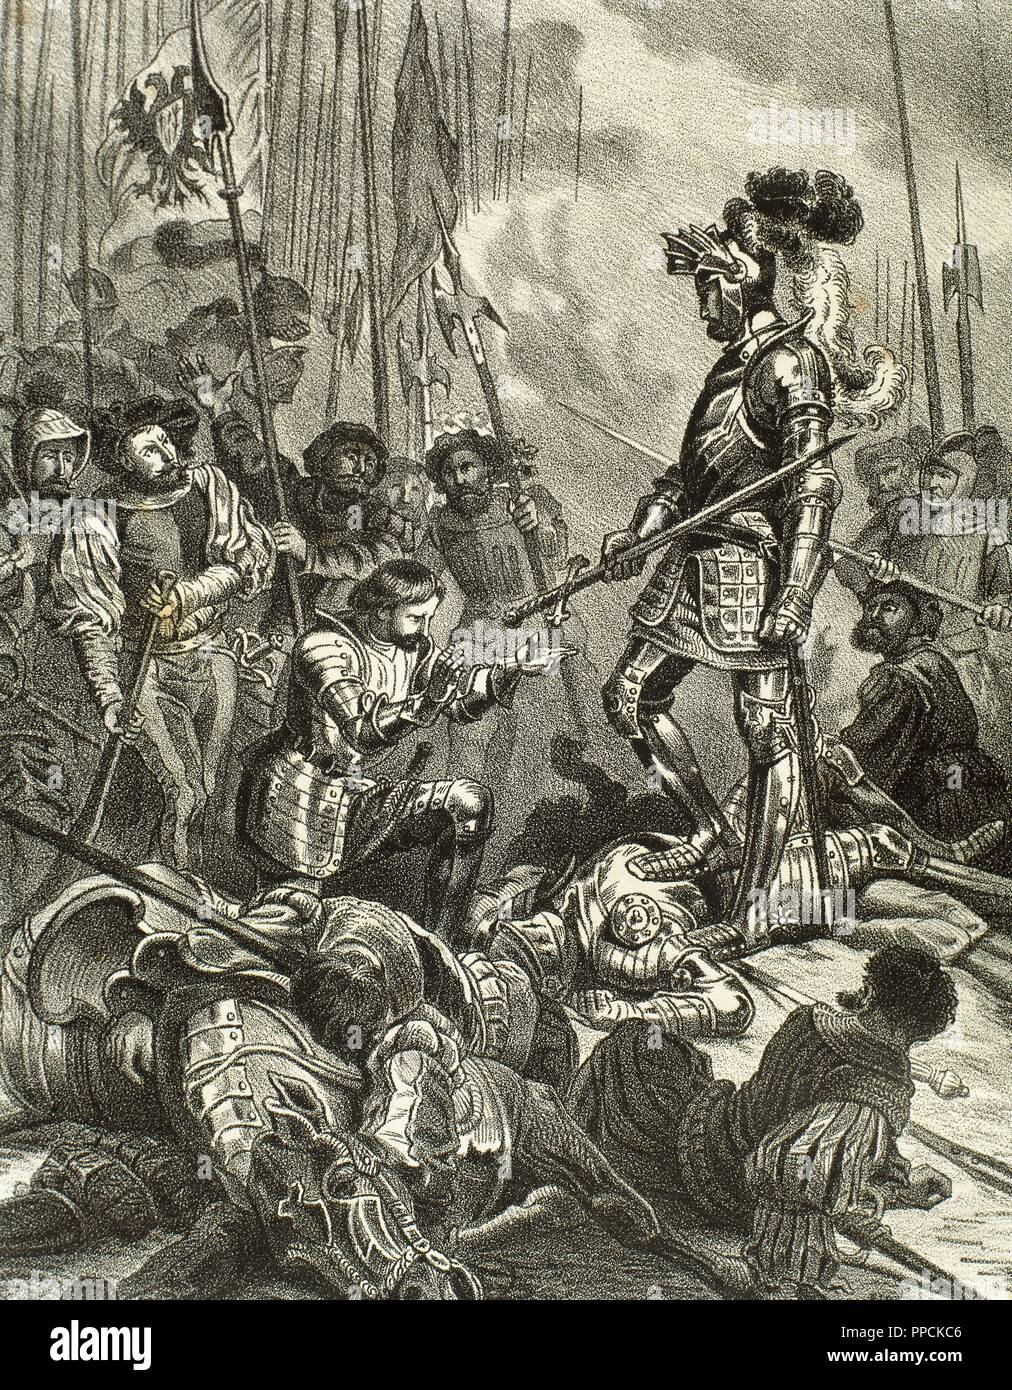 The battle of Pavia. Held on February 24, 1525 between the French army under King Francis I (1494-1547) and German-Spanish troops of Emperor Charles V (1500-1558), who won the battle. Francis I of France made prisoner after his defeat. Engraving. Stock Photo